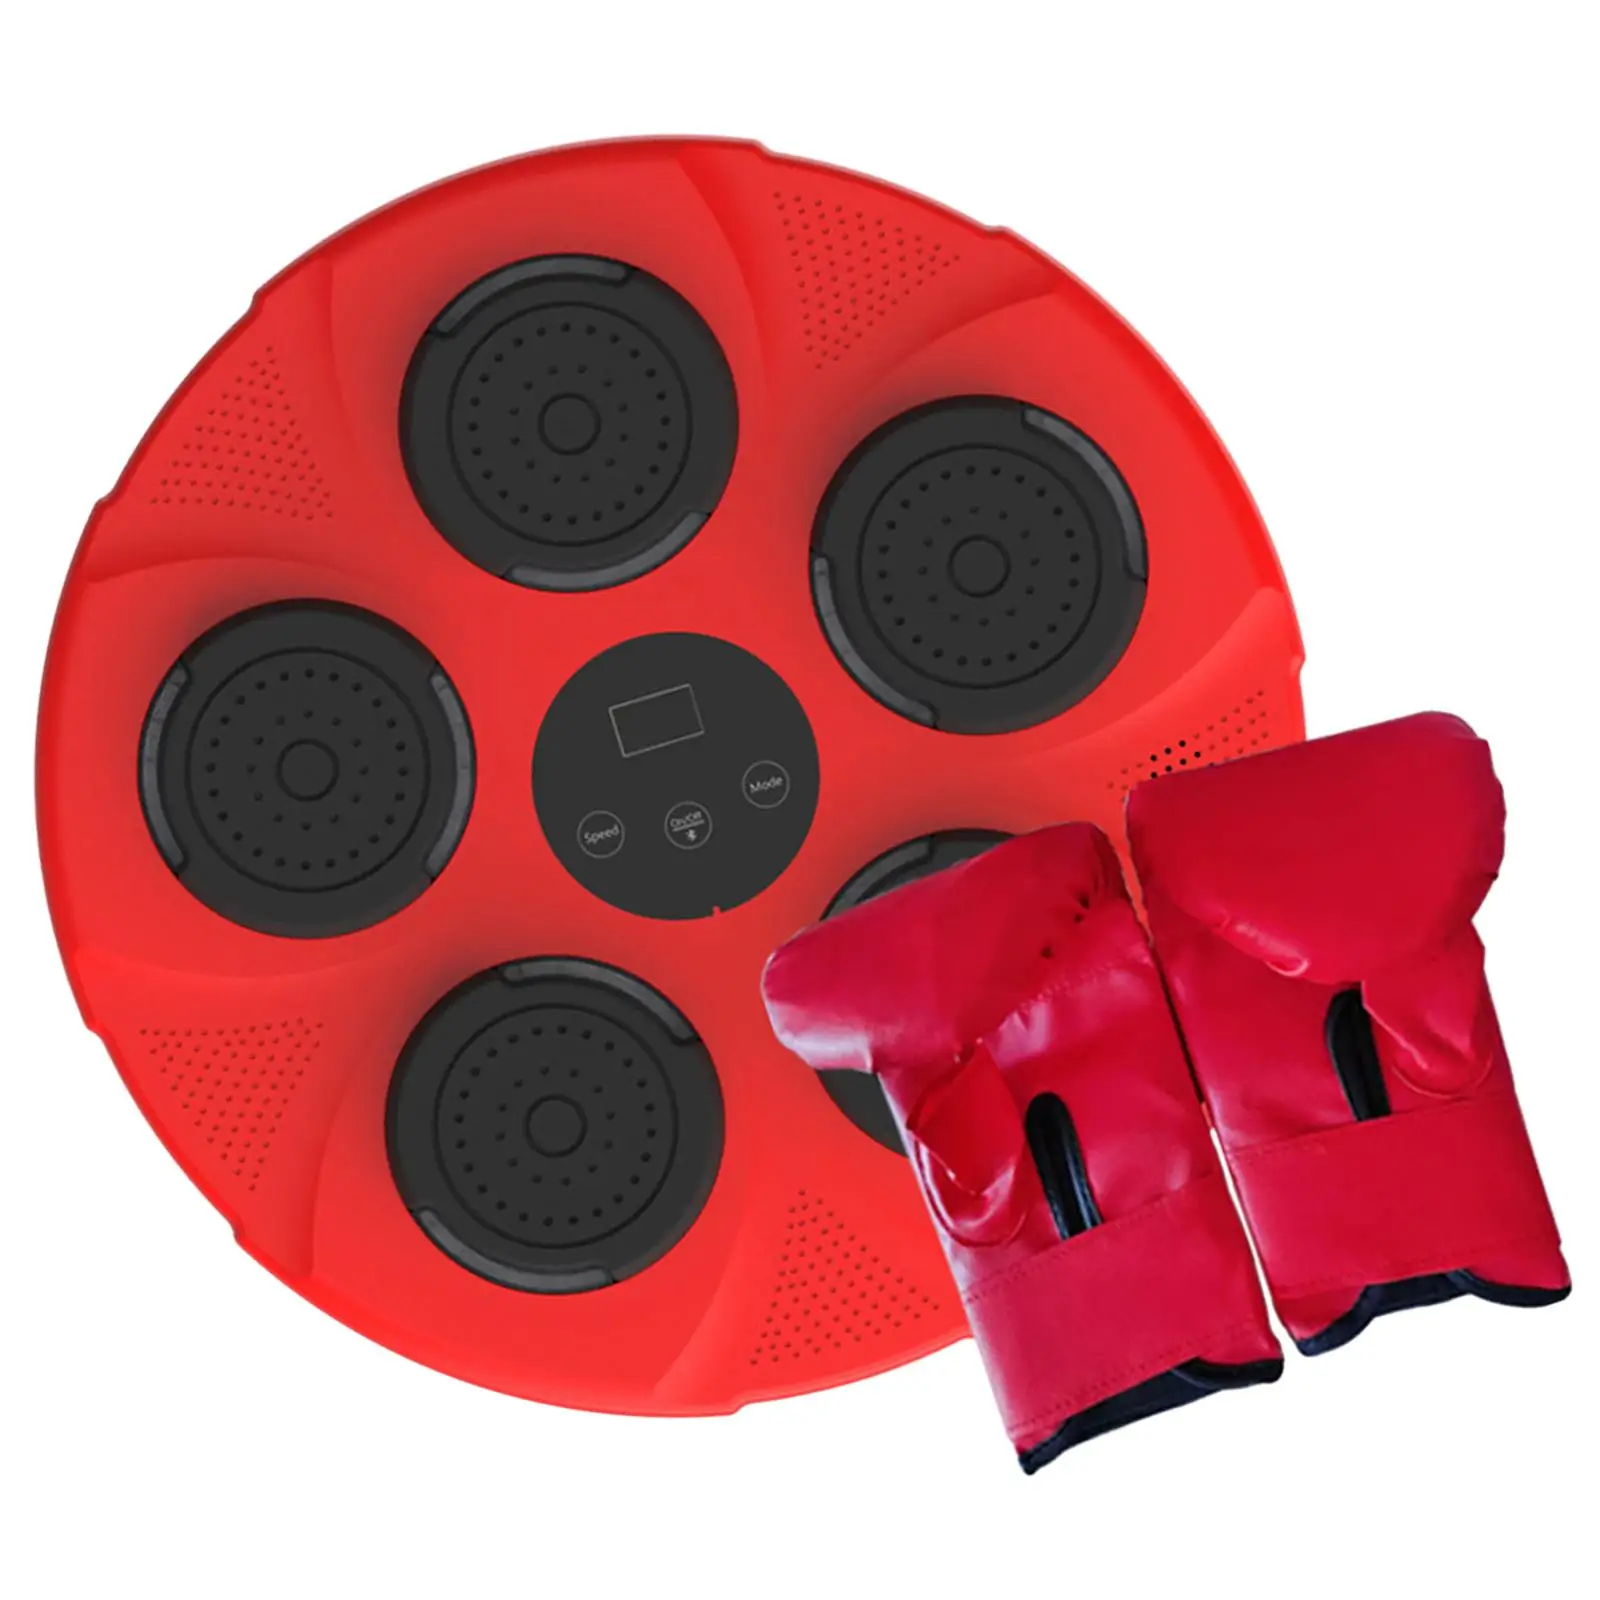 Boxing Machine Rhythm Wall Target Household Adults Smart Boxing Trainer Punching Pad for Karate Practice Exercise Accessories